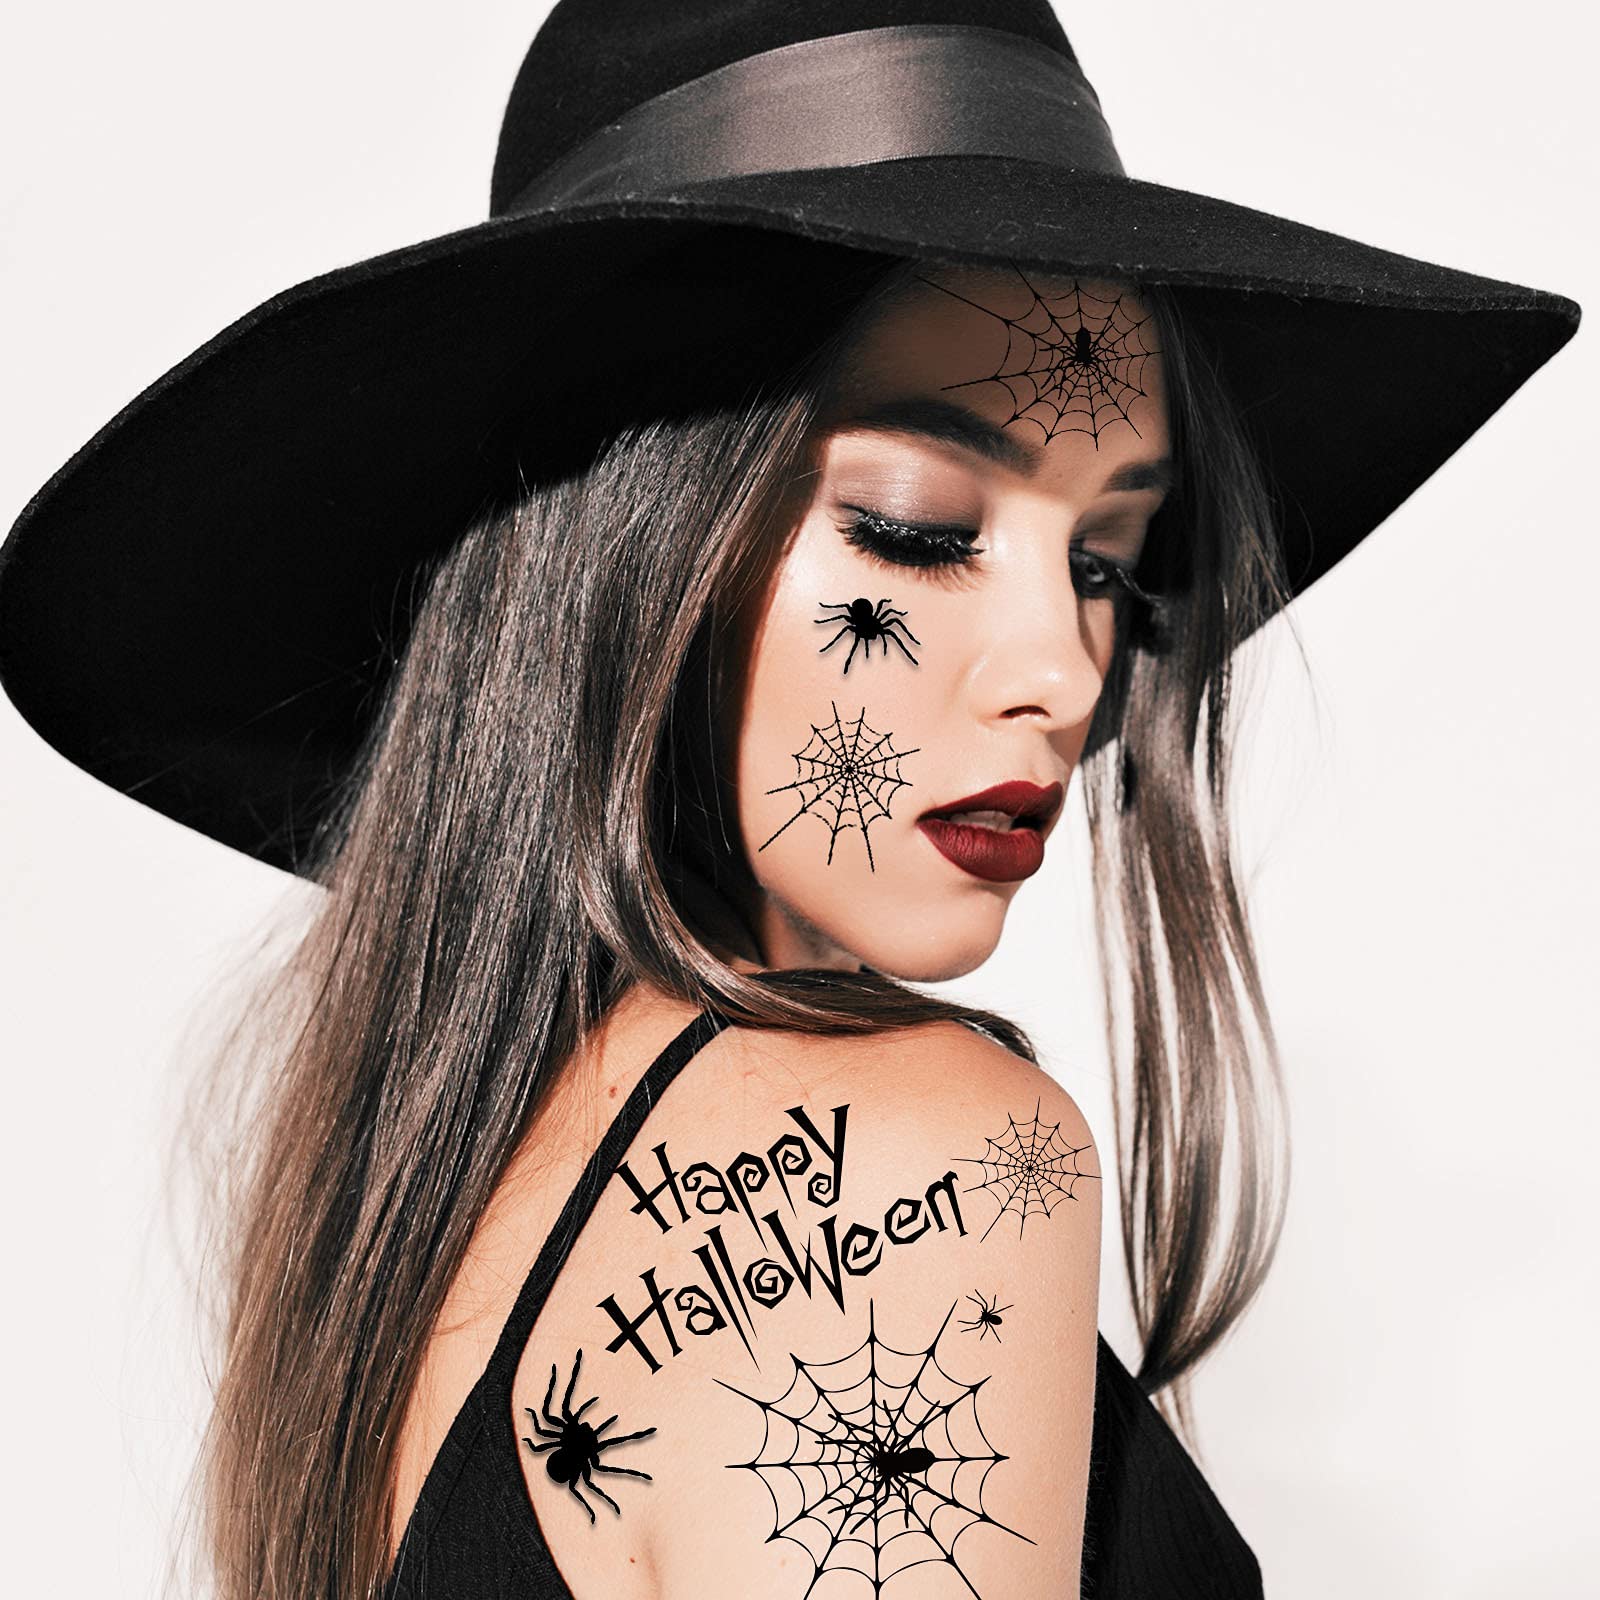 Whaline 250Pcs+ Halloween Temporary Tattoos 16 Sheet Waterproof Tattoo Stickers Black Gothic Spider Web Cat Witch Tattoo Decals for Boy Girl Trick or Treat Decoration Party Favors Arm Body Face